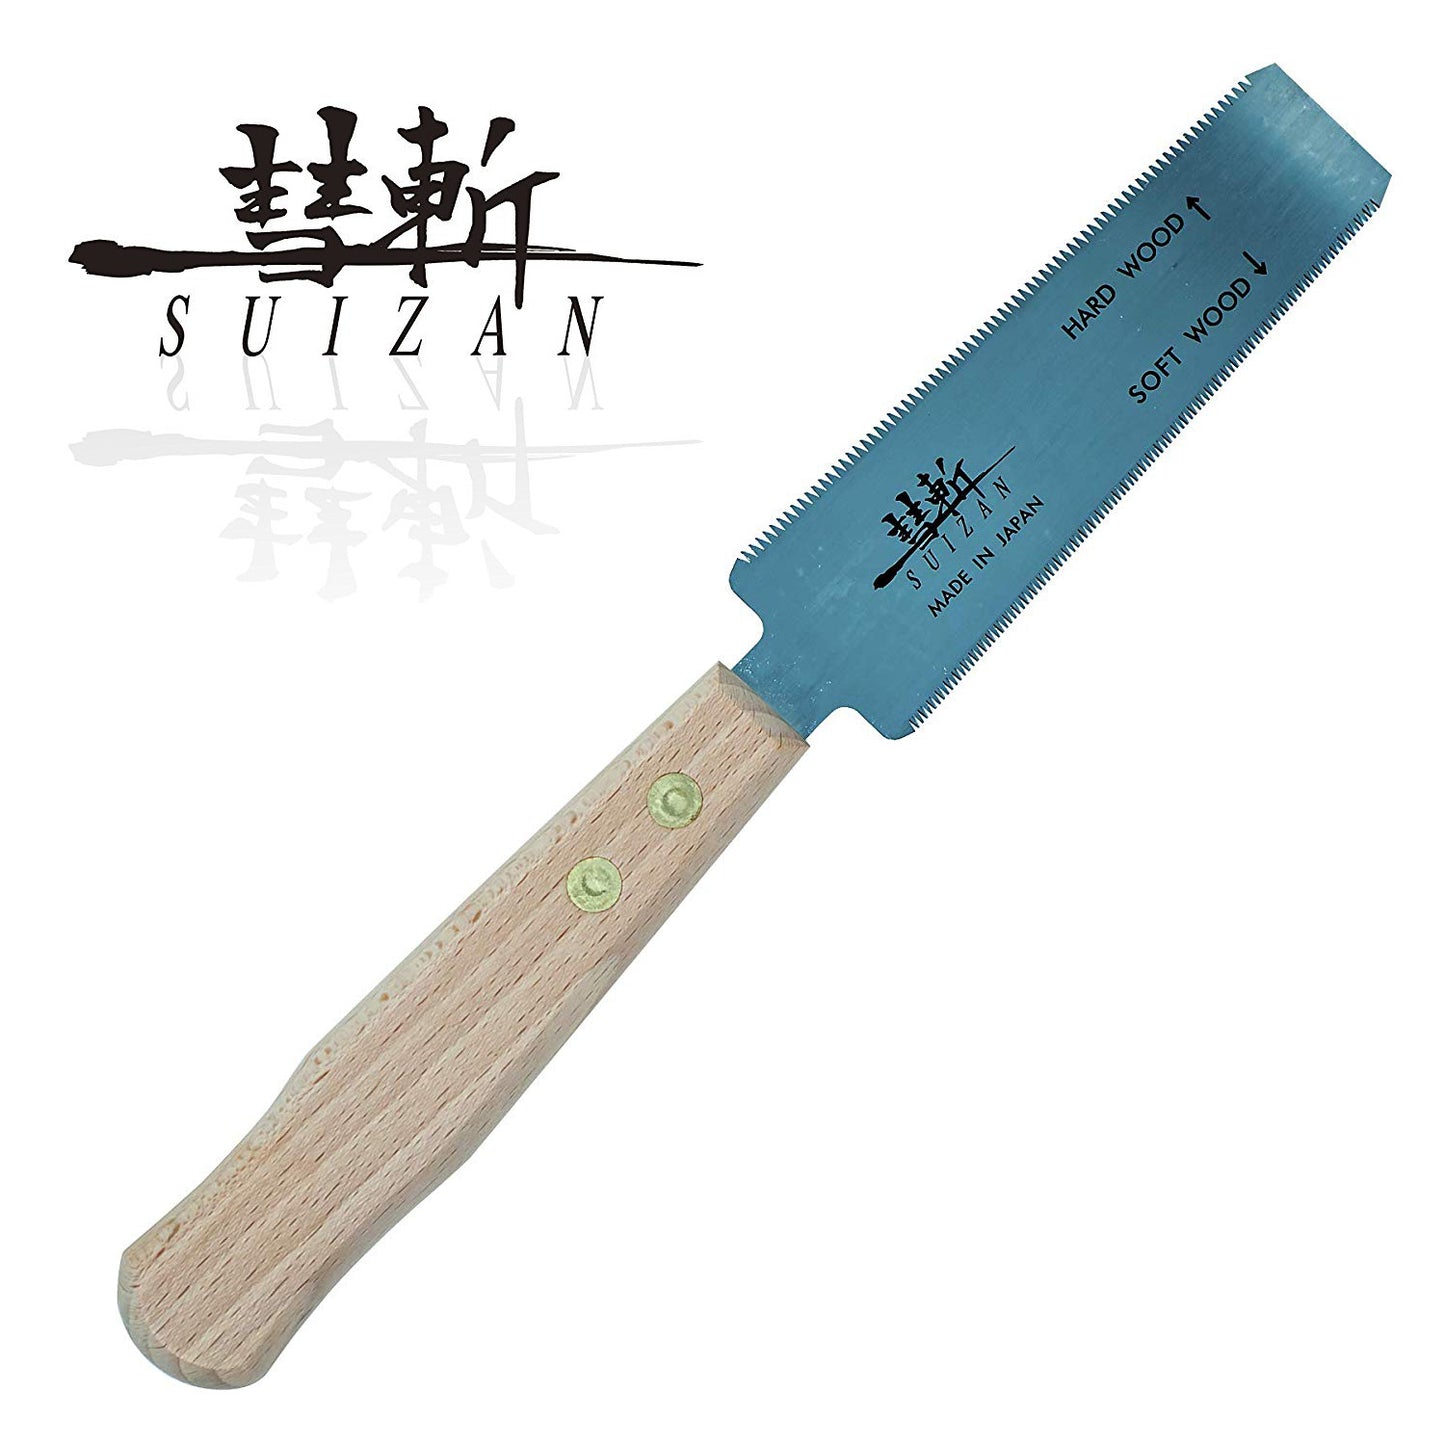 SUIZAN japanese flush cut saw 5 inch for hardwood and softwood